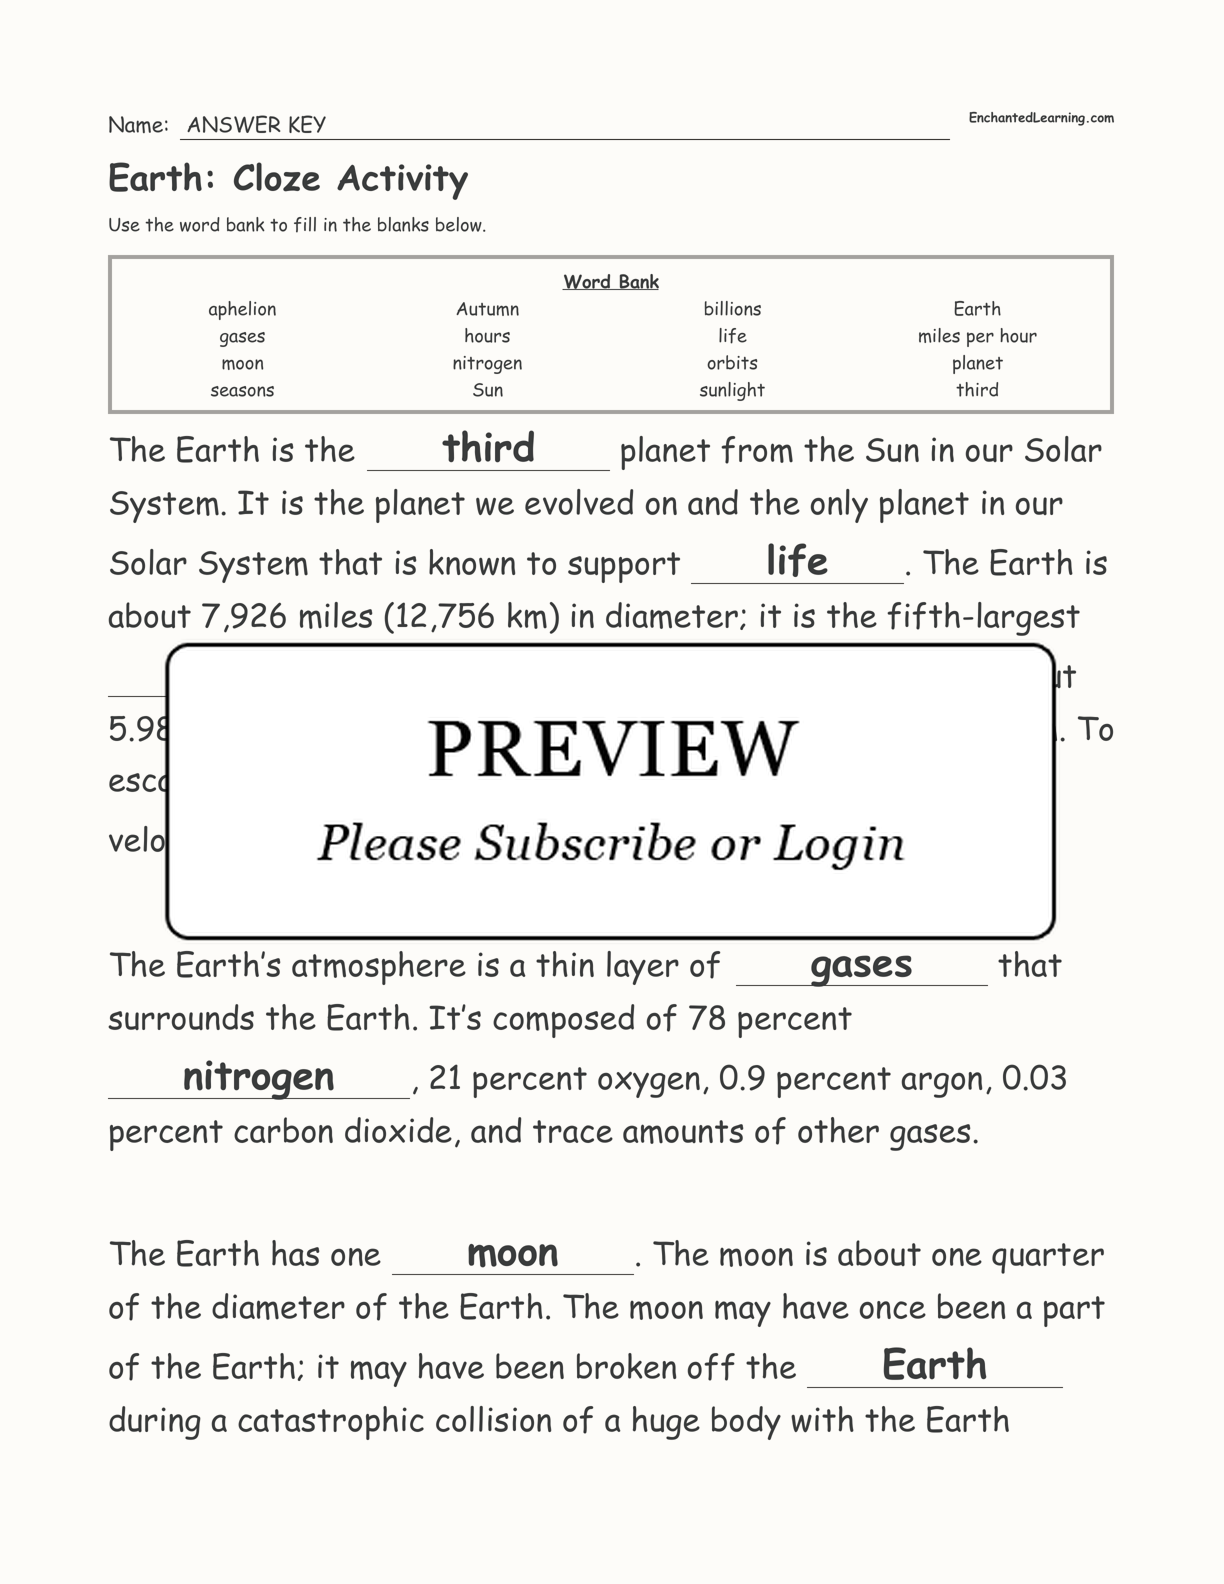 Earth: Cloze Activity interactive worksheet page 3